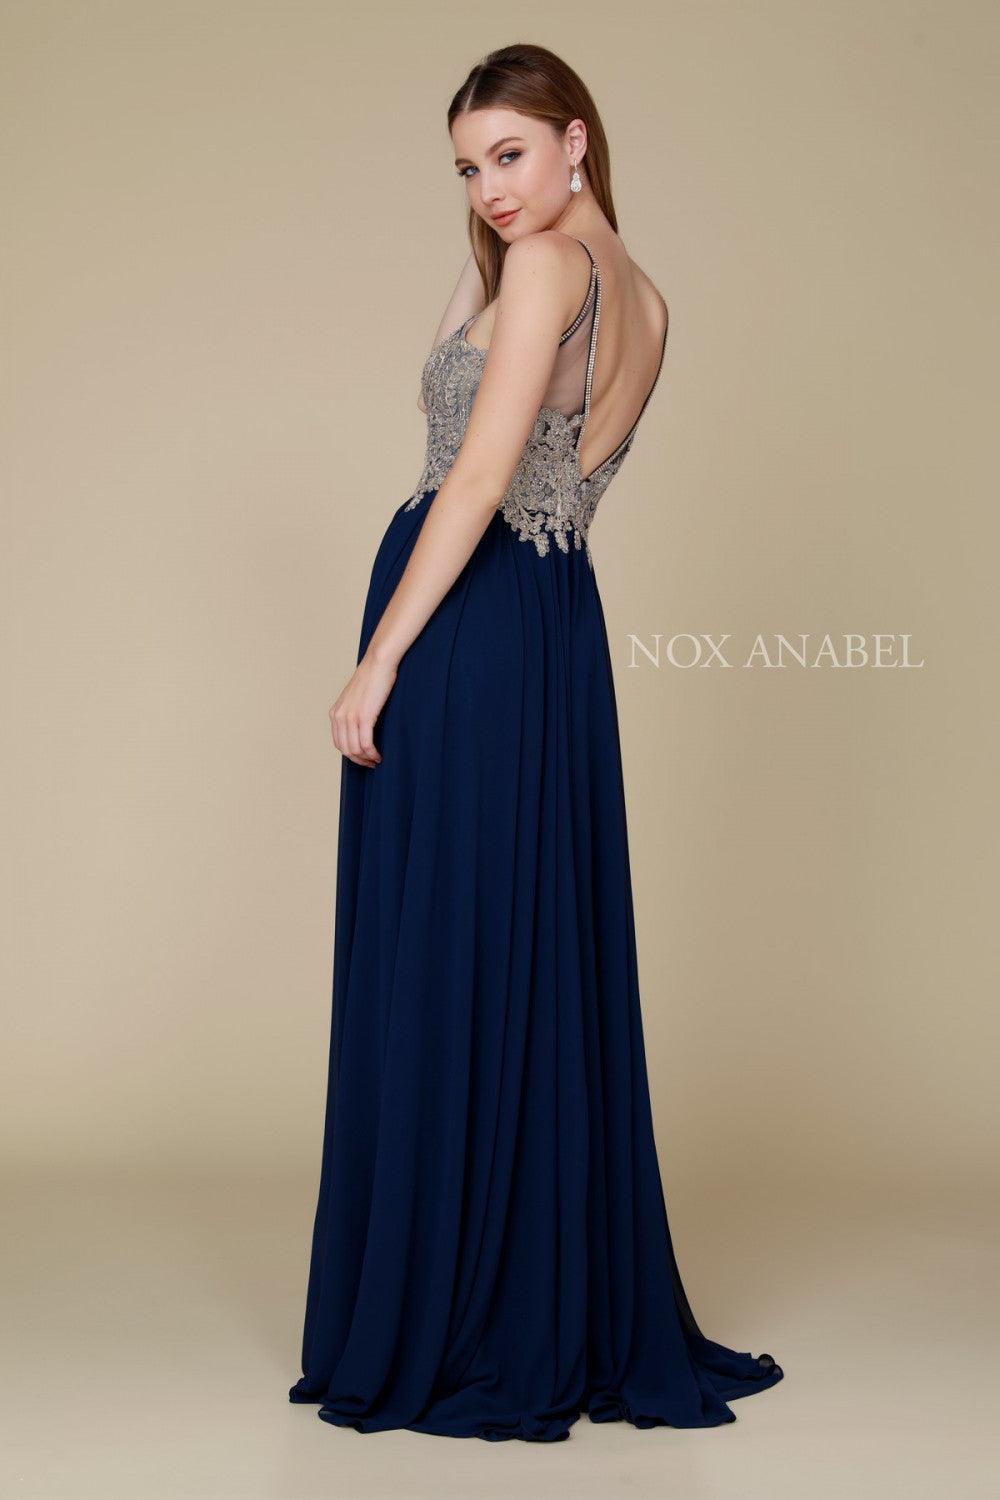 Long Open Back Dress With Appliquéd Bodice - The Dress Outlet Nox Anabel